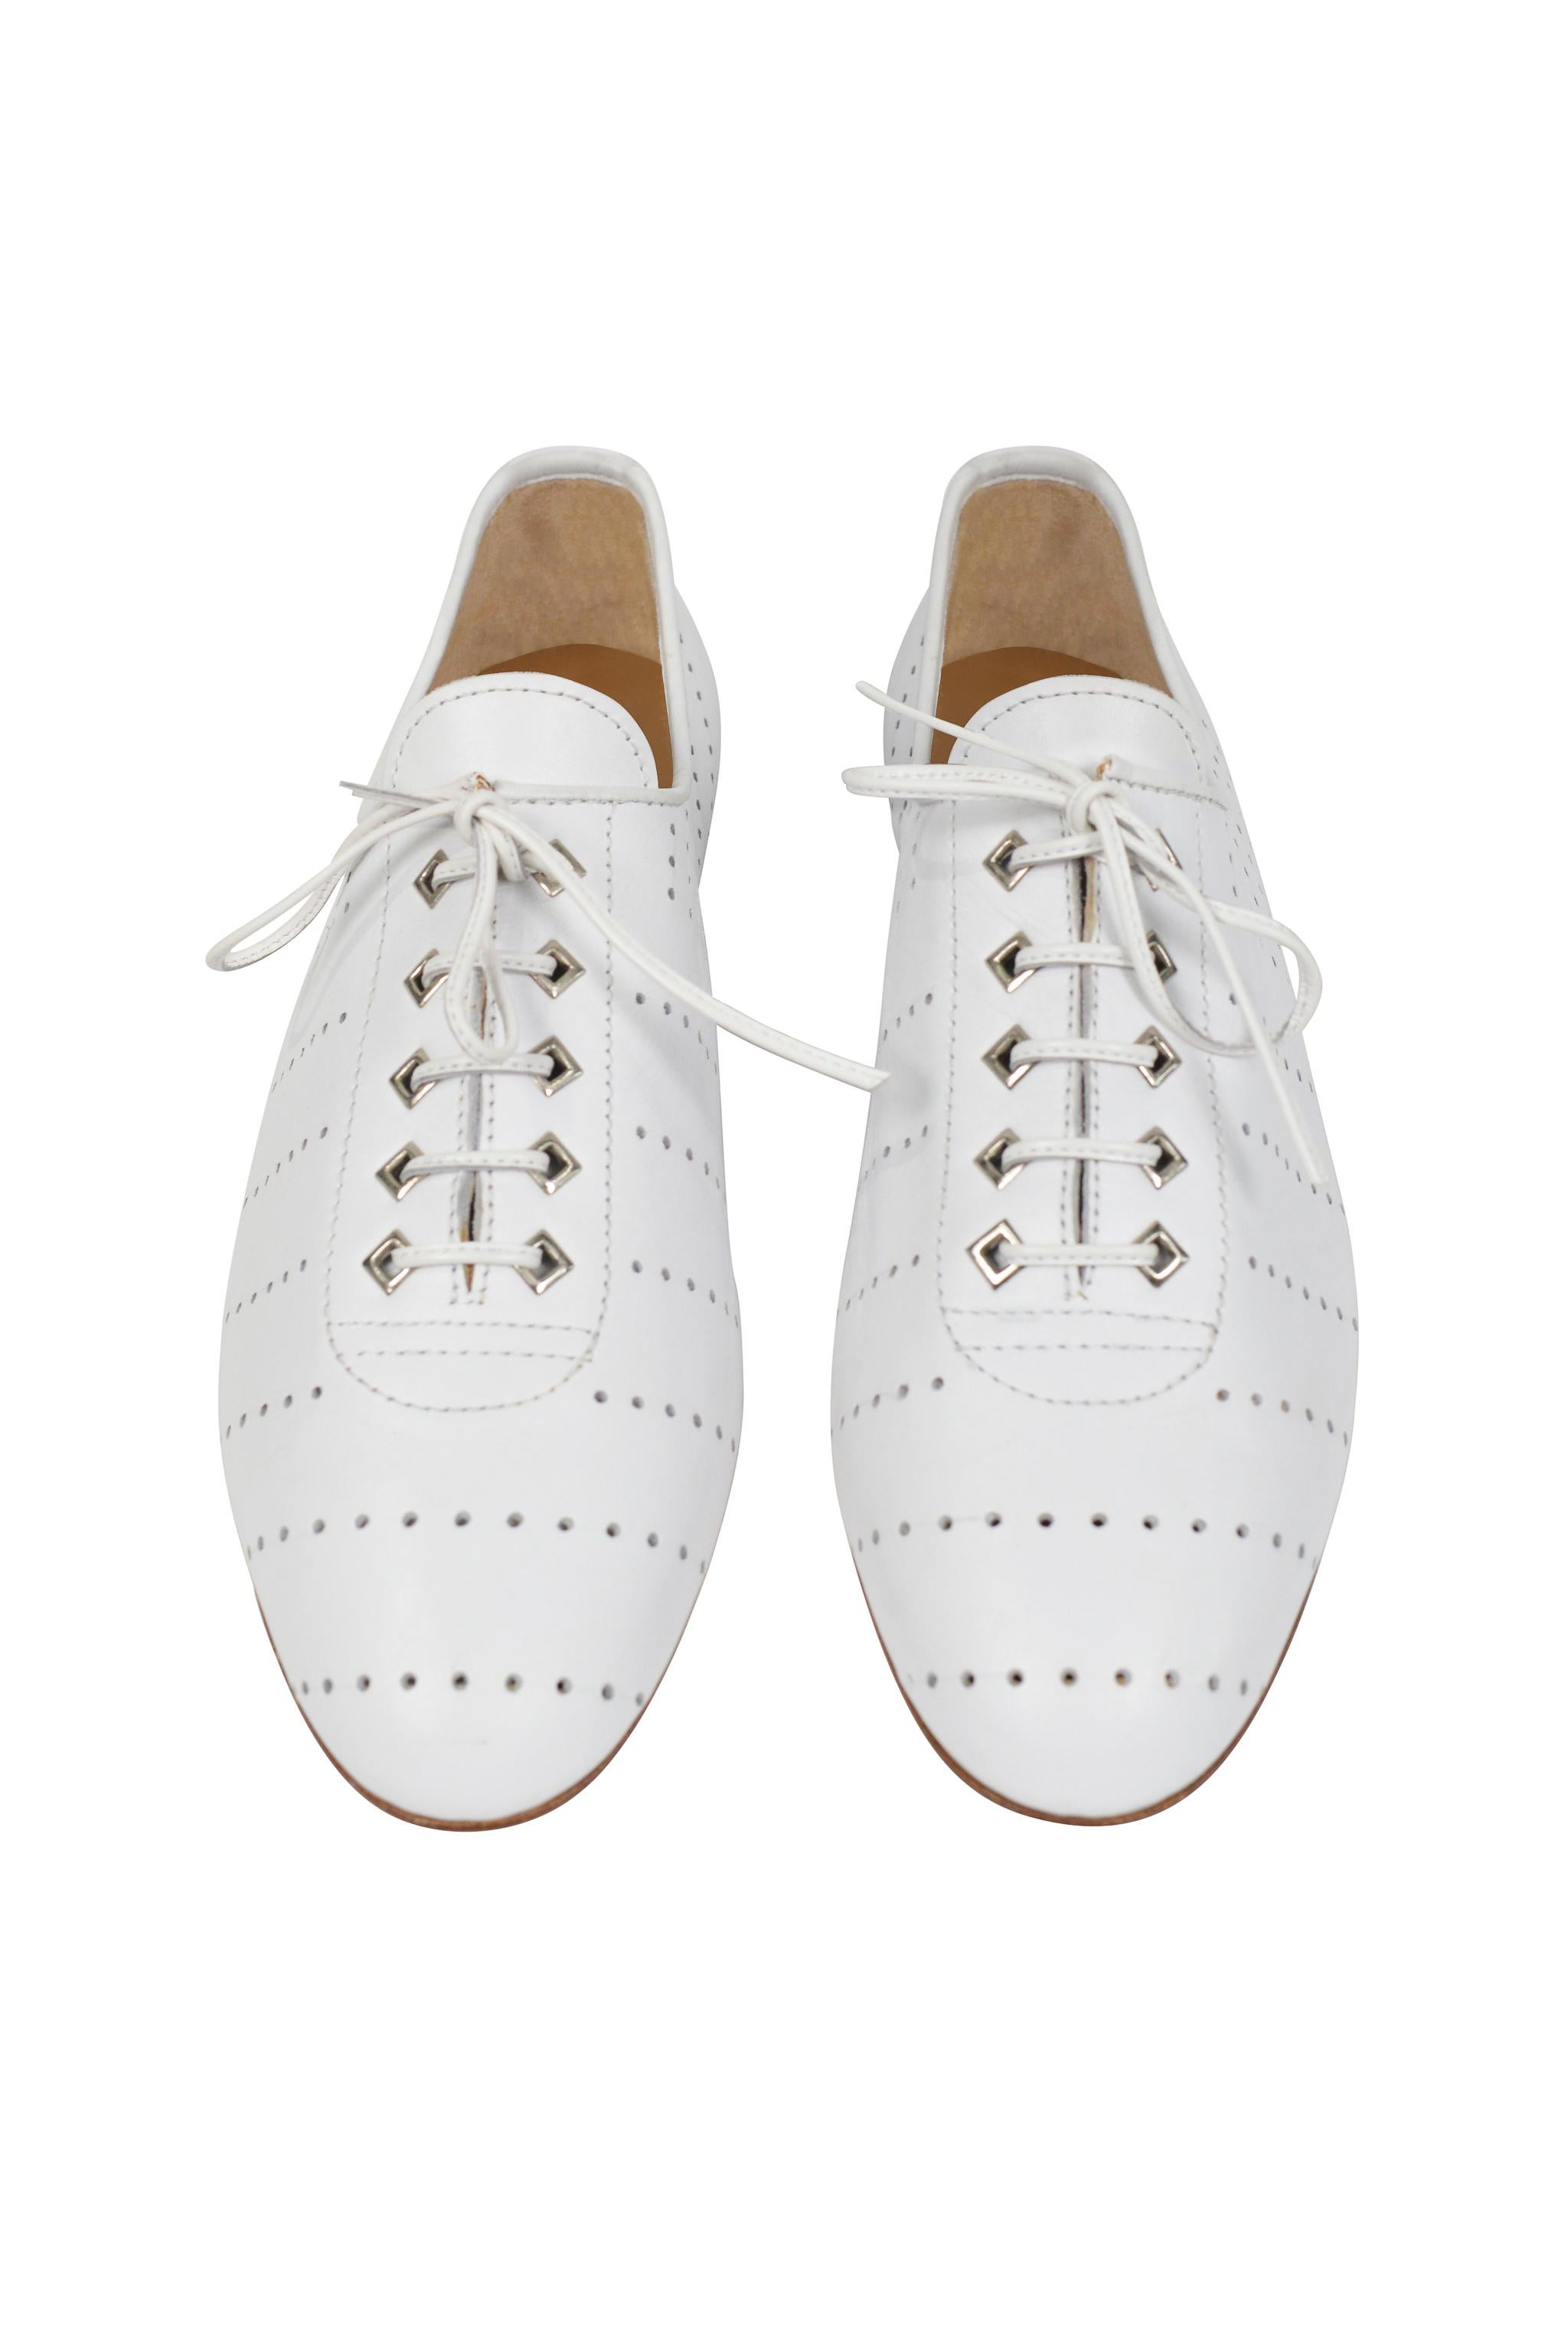 Gray Alaia White Leather Perforated Brogue Oxford Shoes 80S-90S For Sale